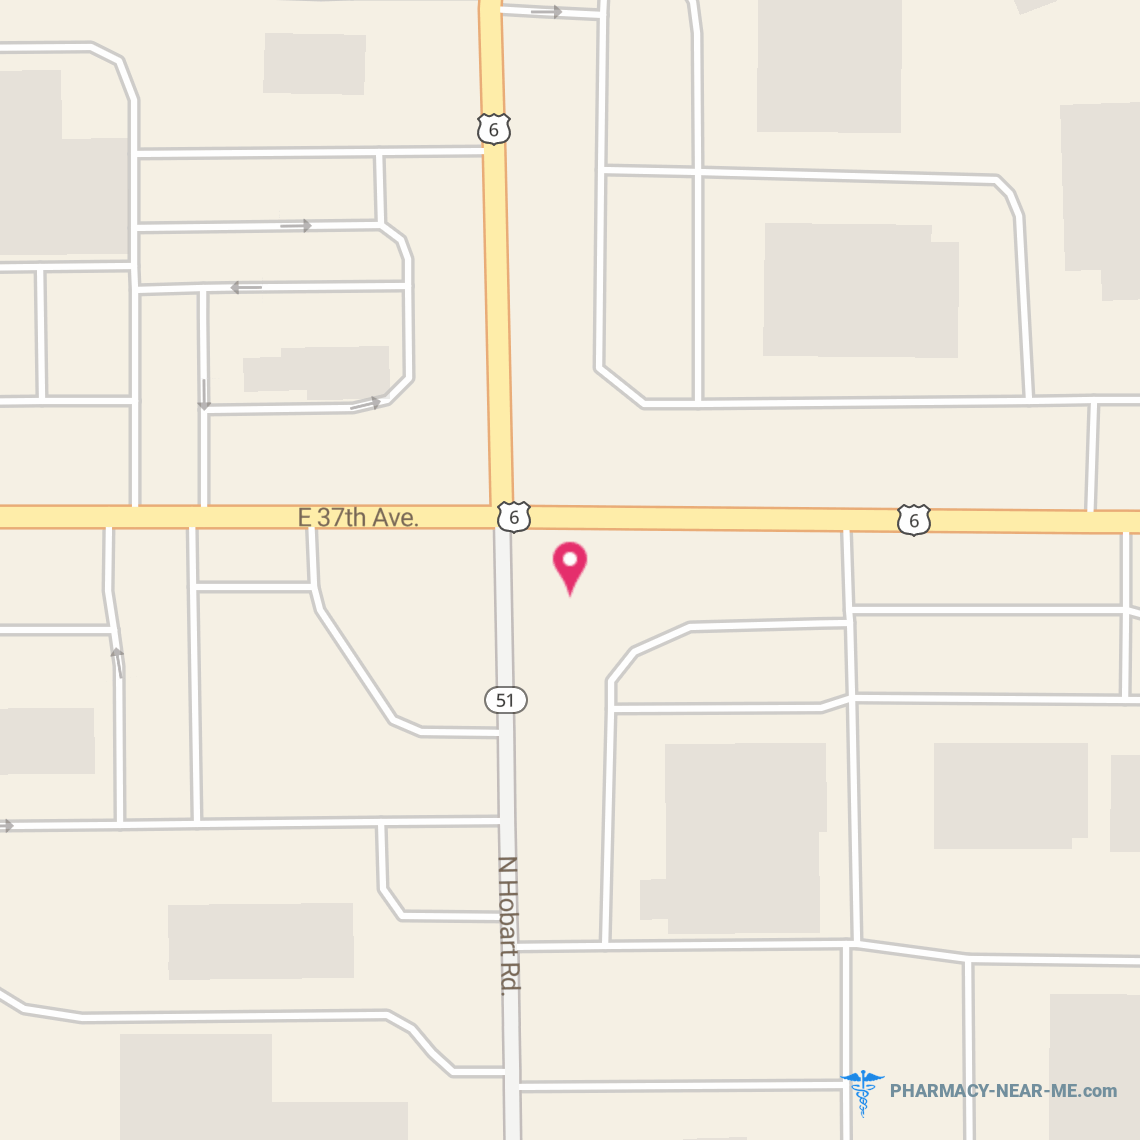 WALGREENS #04581 - Pharmacy Hours, Phone, Reviews & Information: 1605 East 37th Avenue, Hobart, Indiana 46342, United States